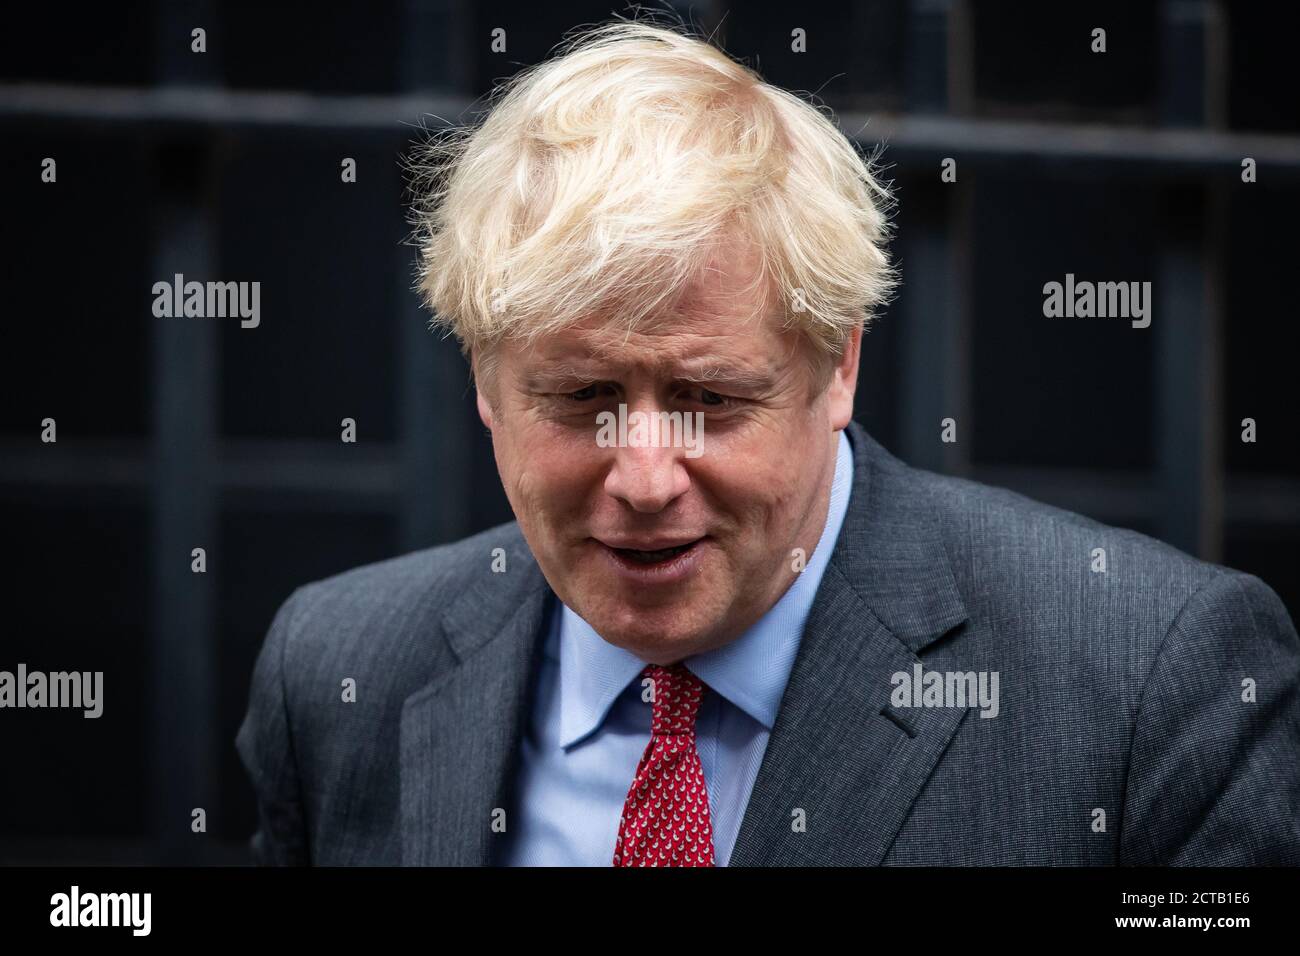 Prime Minister Boris Johnson leaves 10 Downing Street, Westminster, London as he heads to Parliament to appear before MPs to set out steps to tackle a second wave of coronavirus following the stark assessment from Sir Patrick Vallance and England's chief medical officer Professor Chris Whitty. Stock Photo